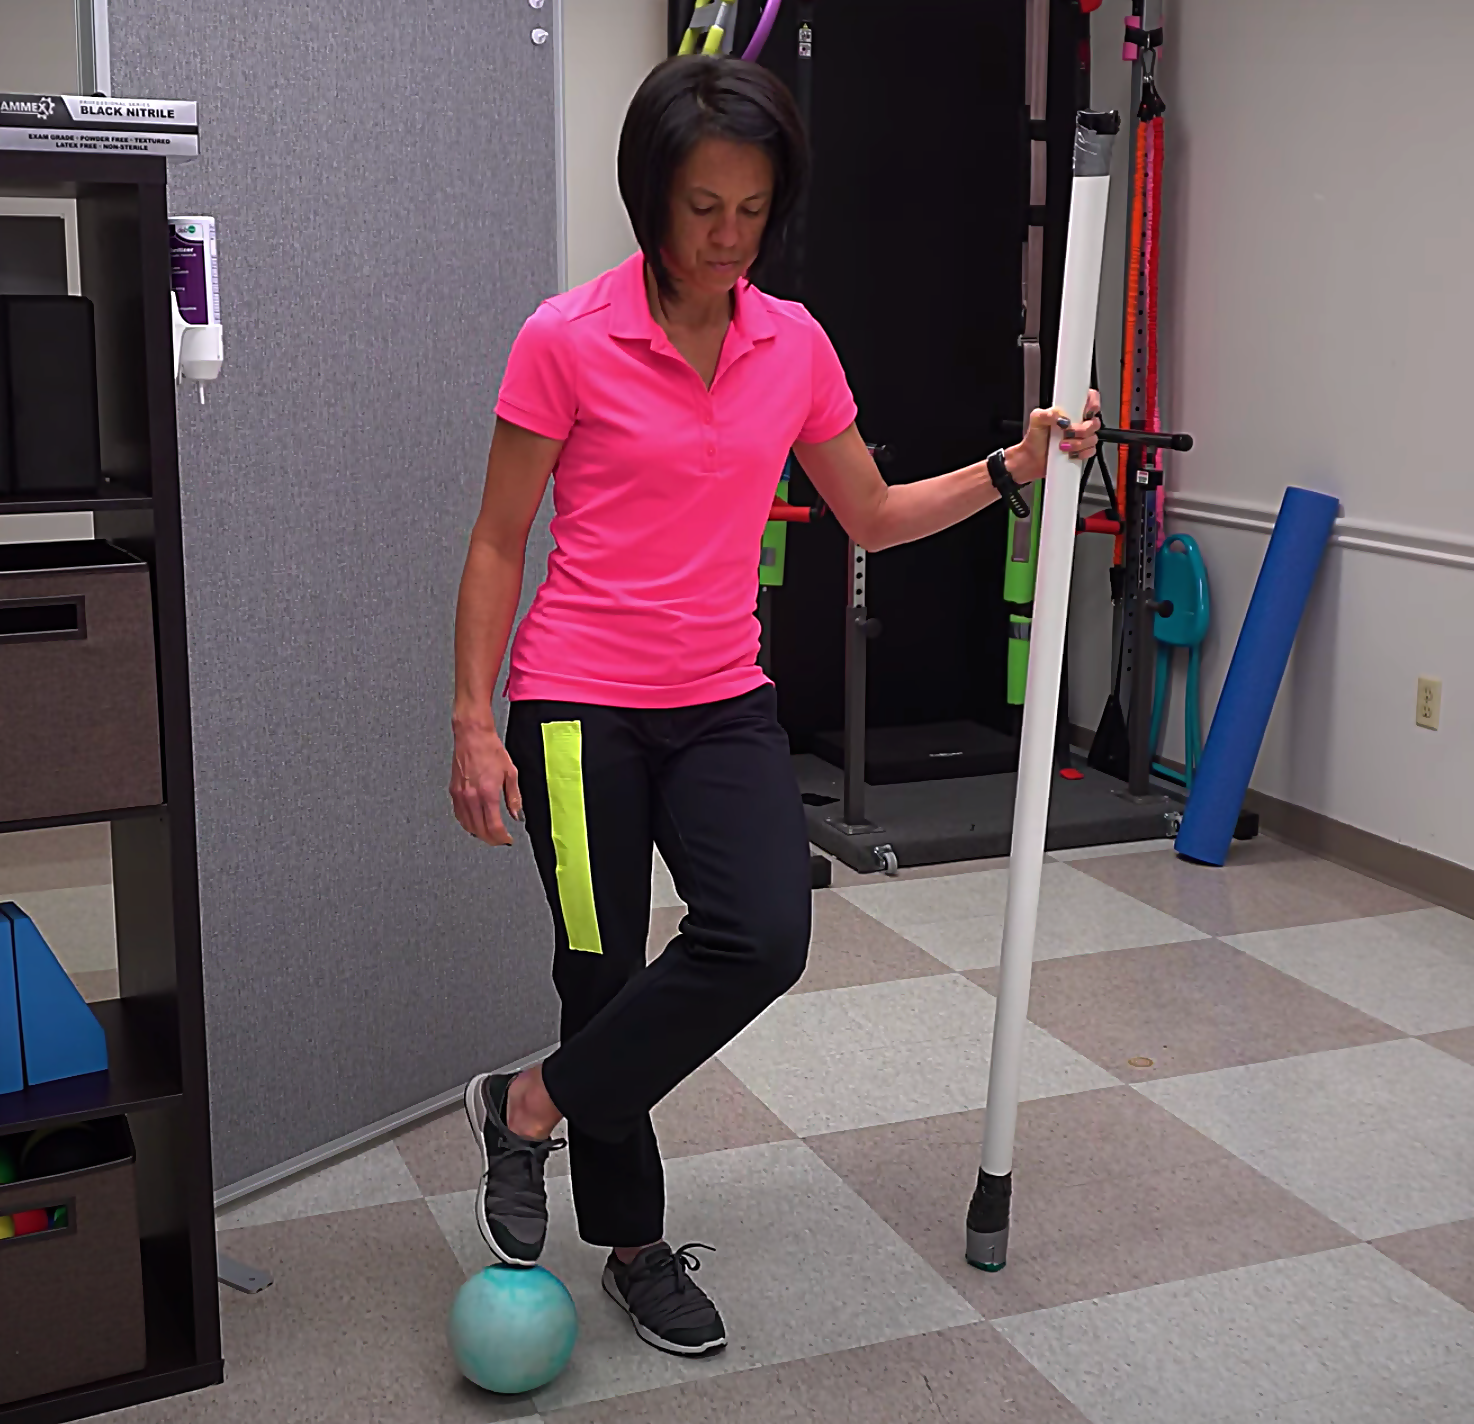 advanced balance activity with a medicine ball and half moon pattern